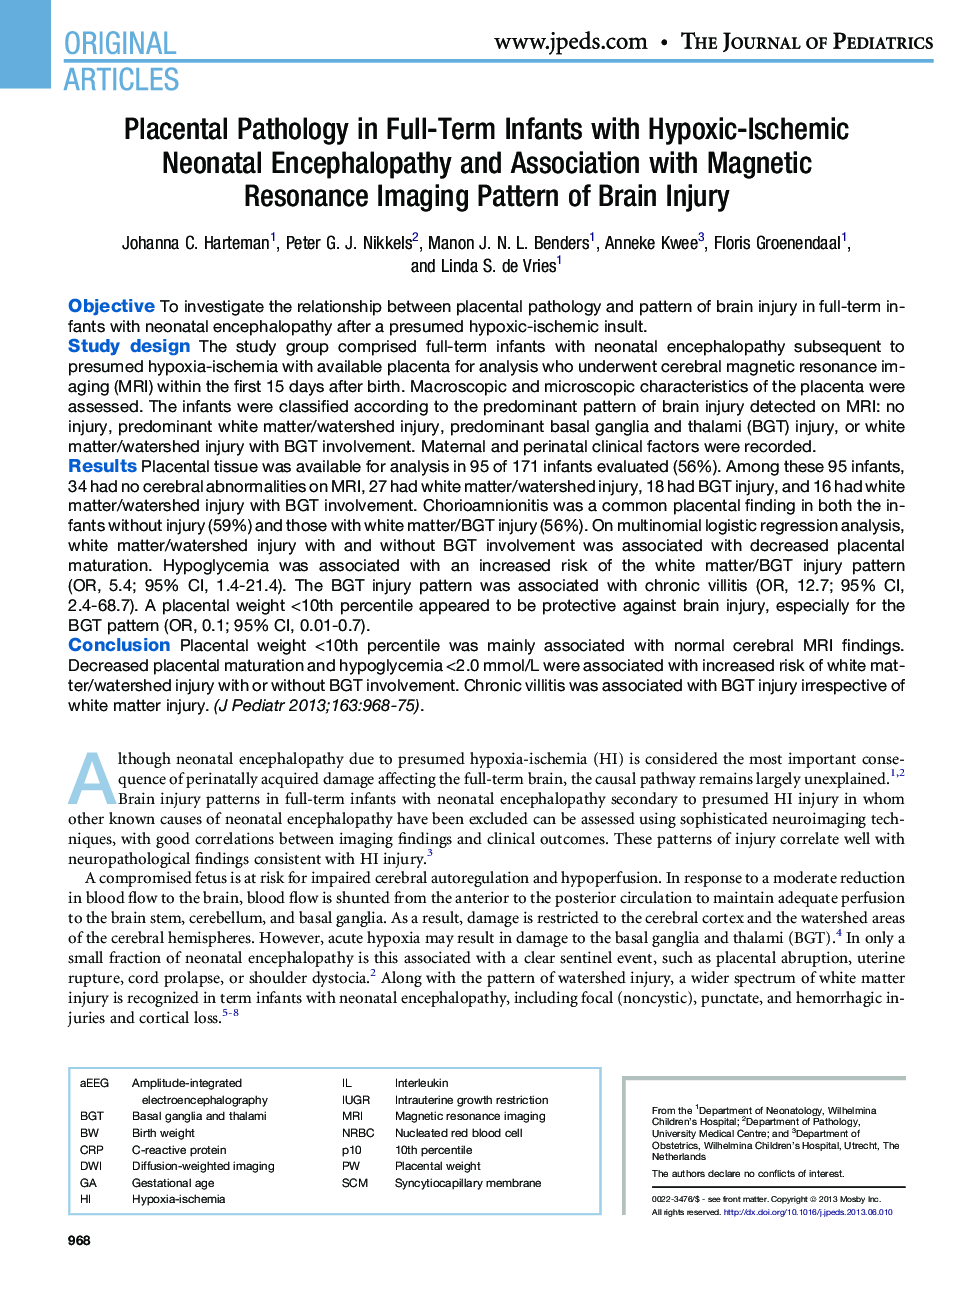 Placental Pathology in Full-Term Infants with Hypoxic-Ischemic Neonatal Encephalopathy and Association with Magnetic Resonance Imaging Pattern of Brain Injury